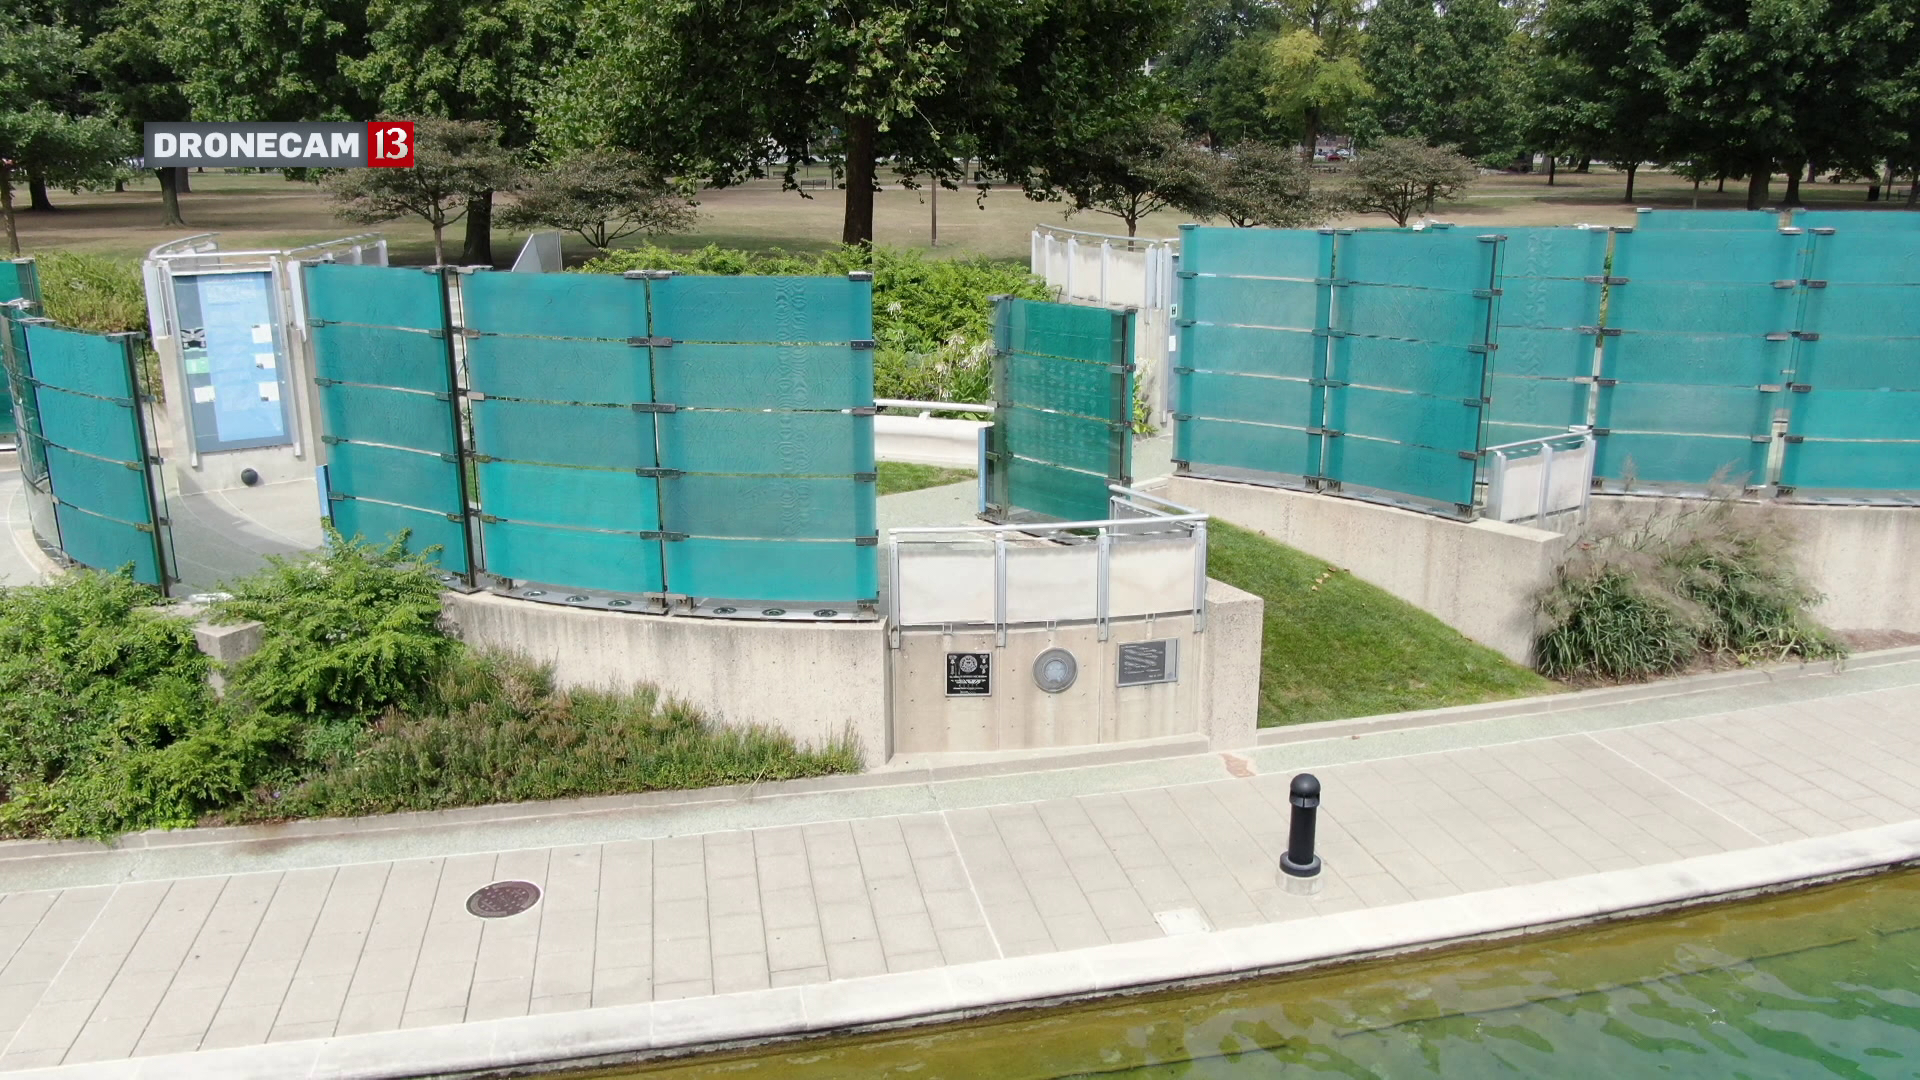 In 1999, Indy unveiled the Medal of Honor Memorial along the canal. The dedication ceremony featured a flyover and speeches from veterans.